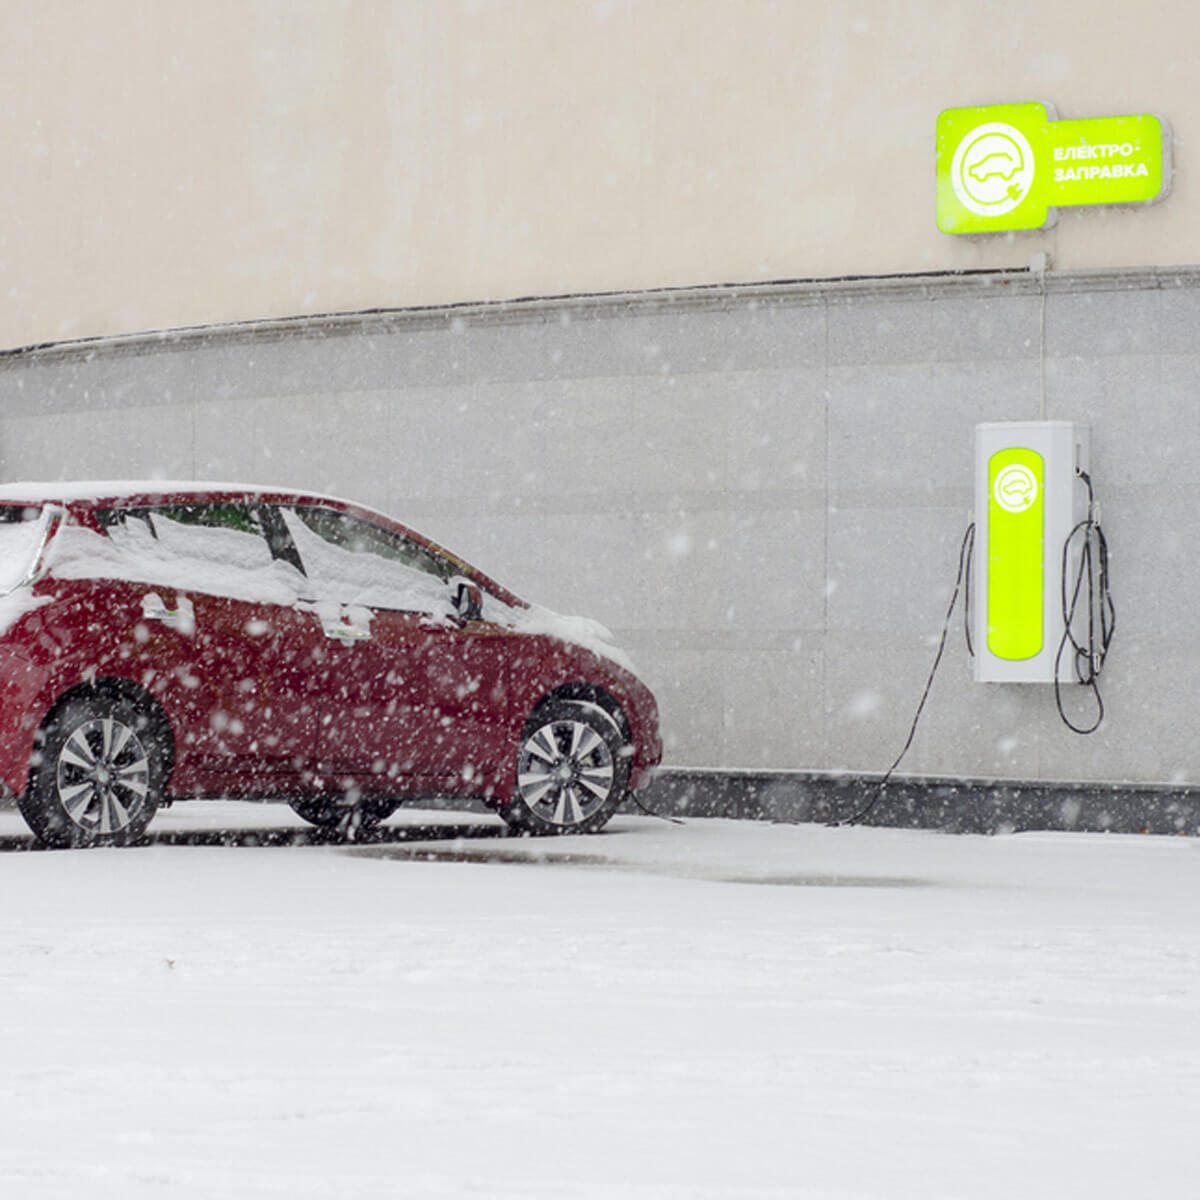 10 Things to Keep Your Electric or Hybrid Car in Good Shape for the Winter